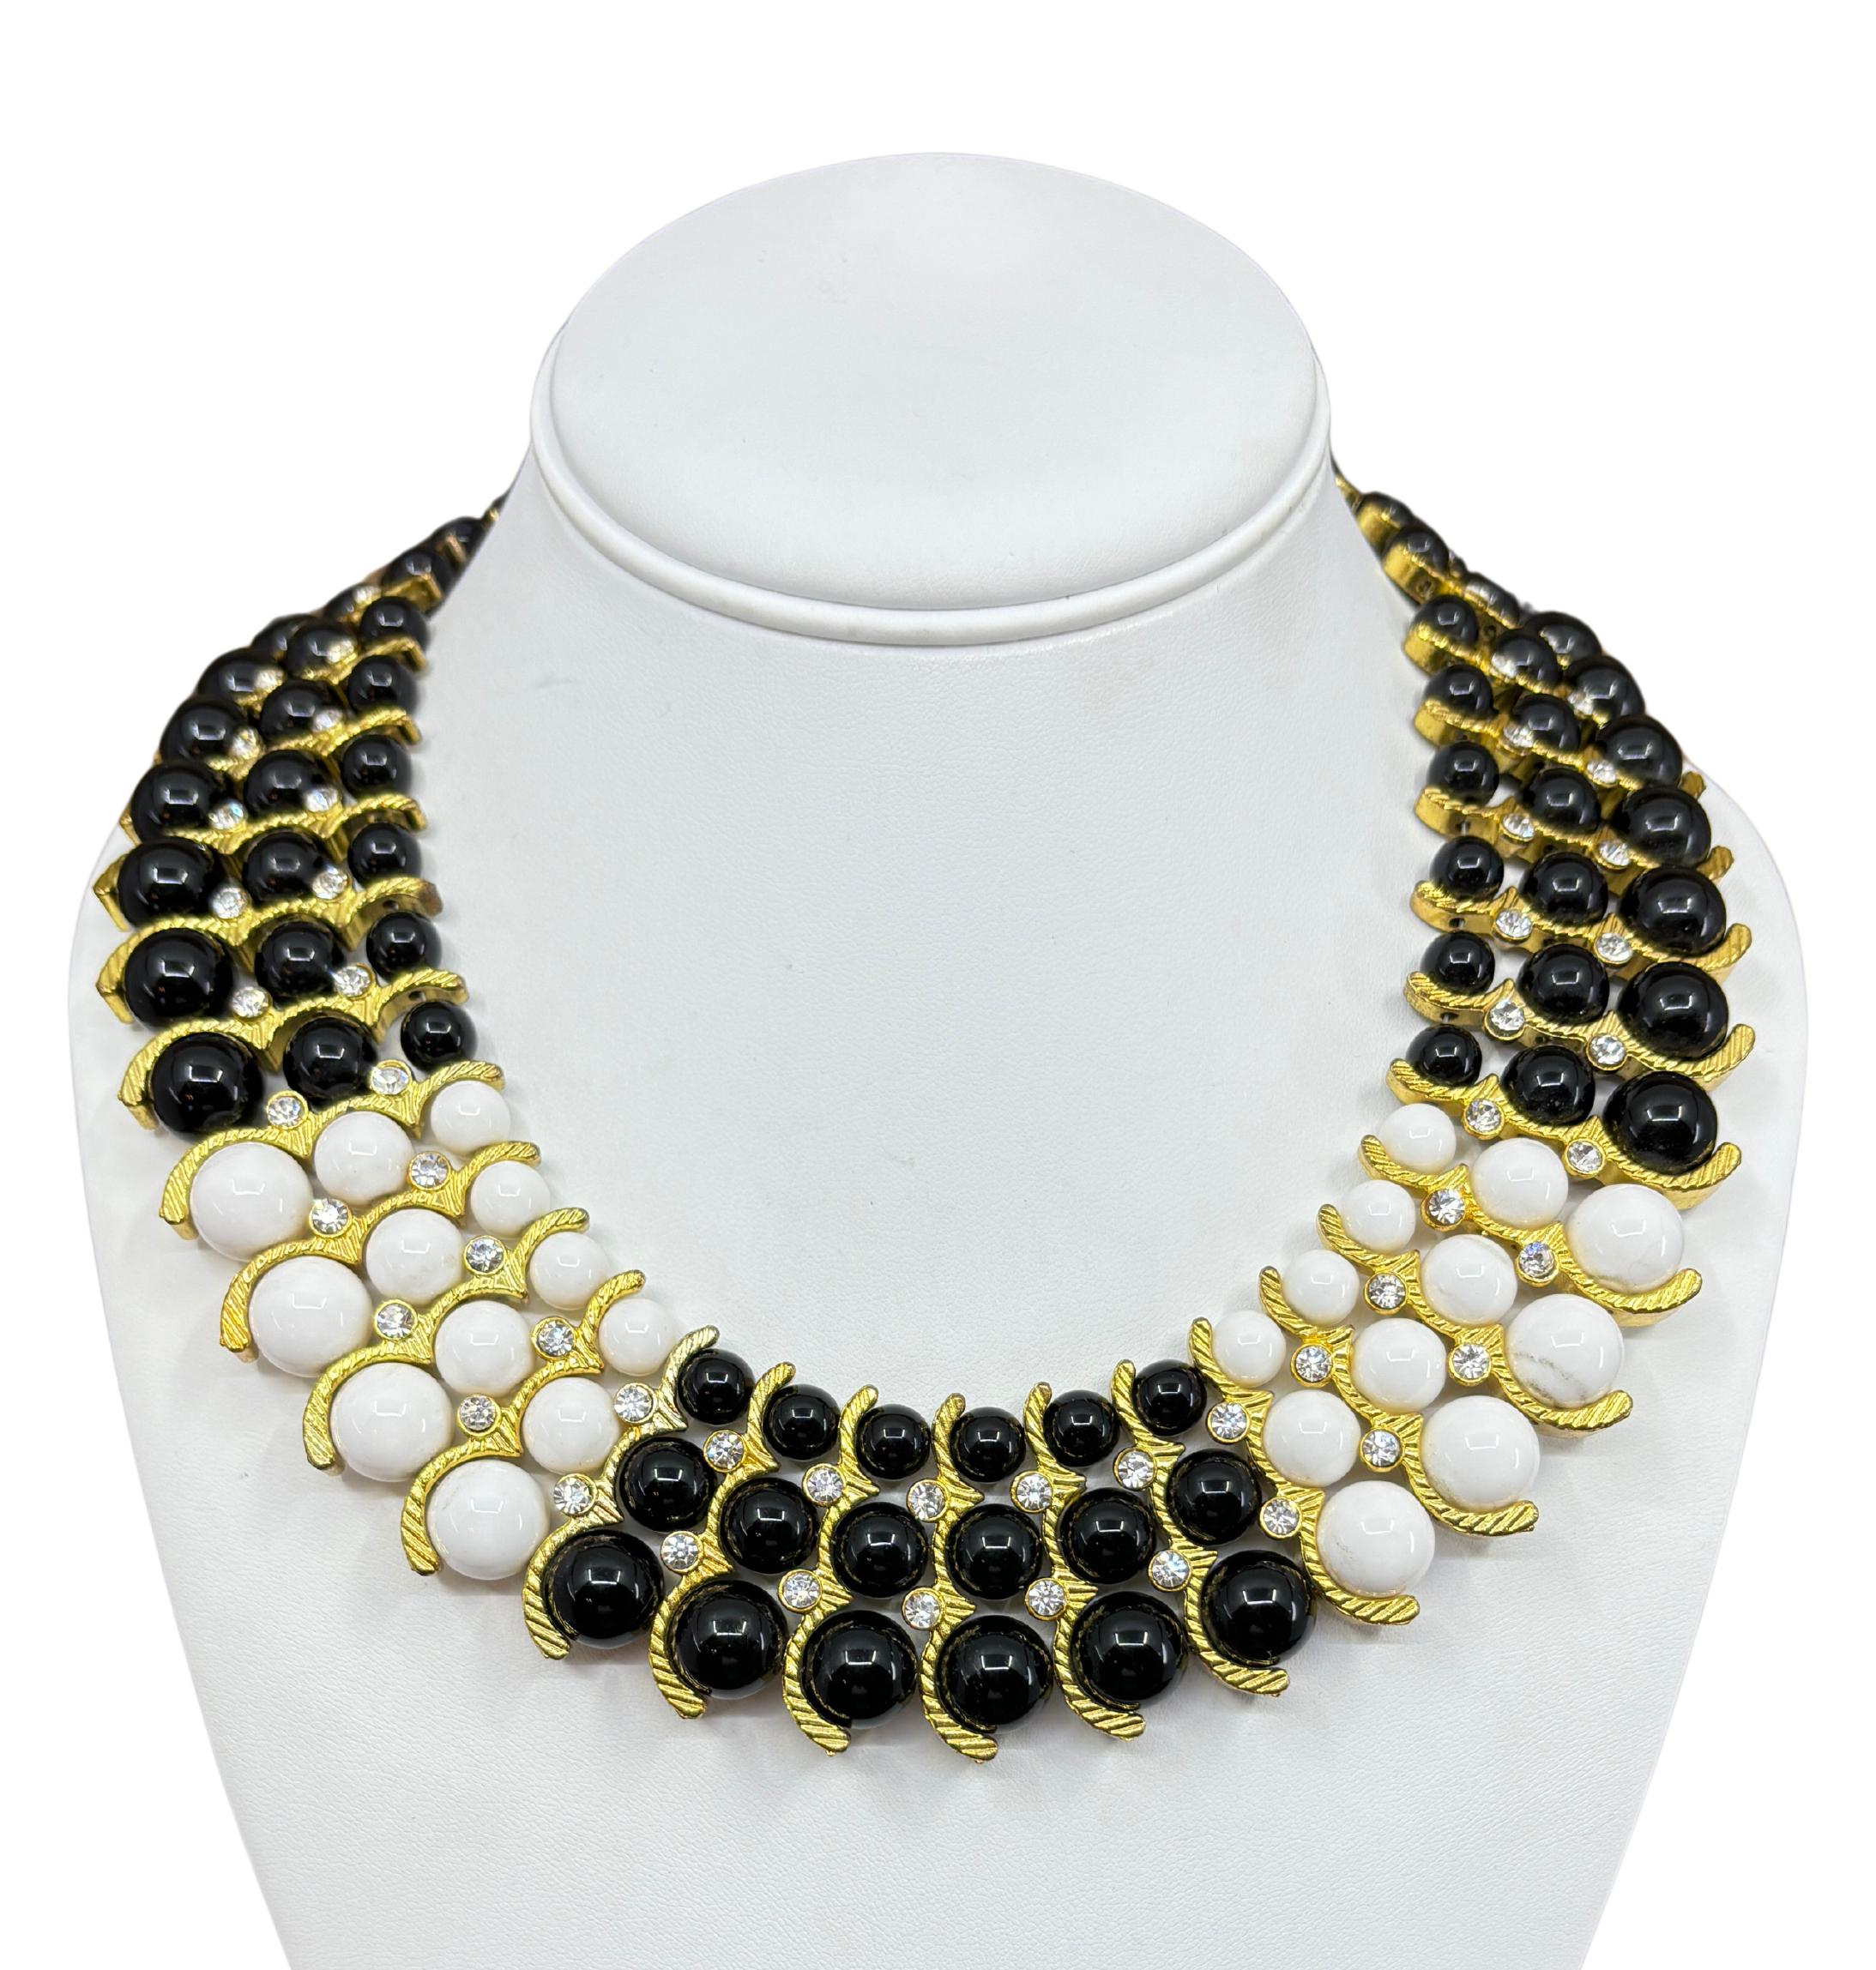 Large Vintage Bead Collar Necklace